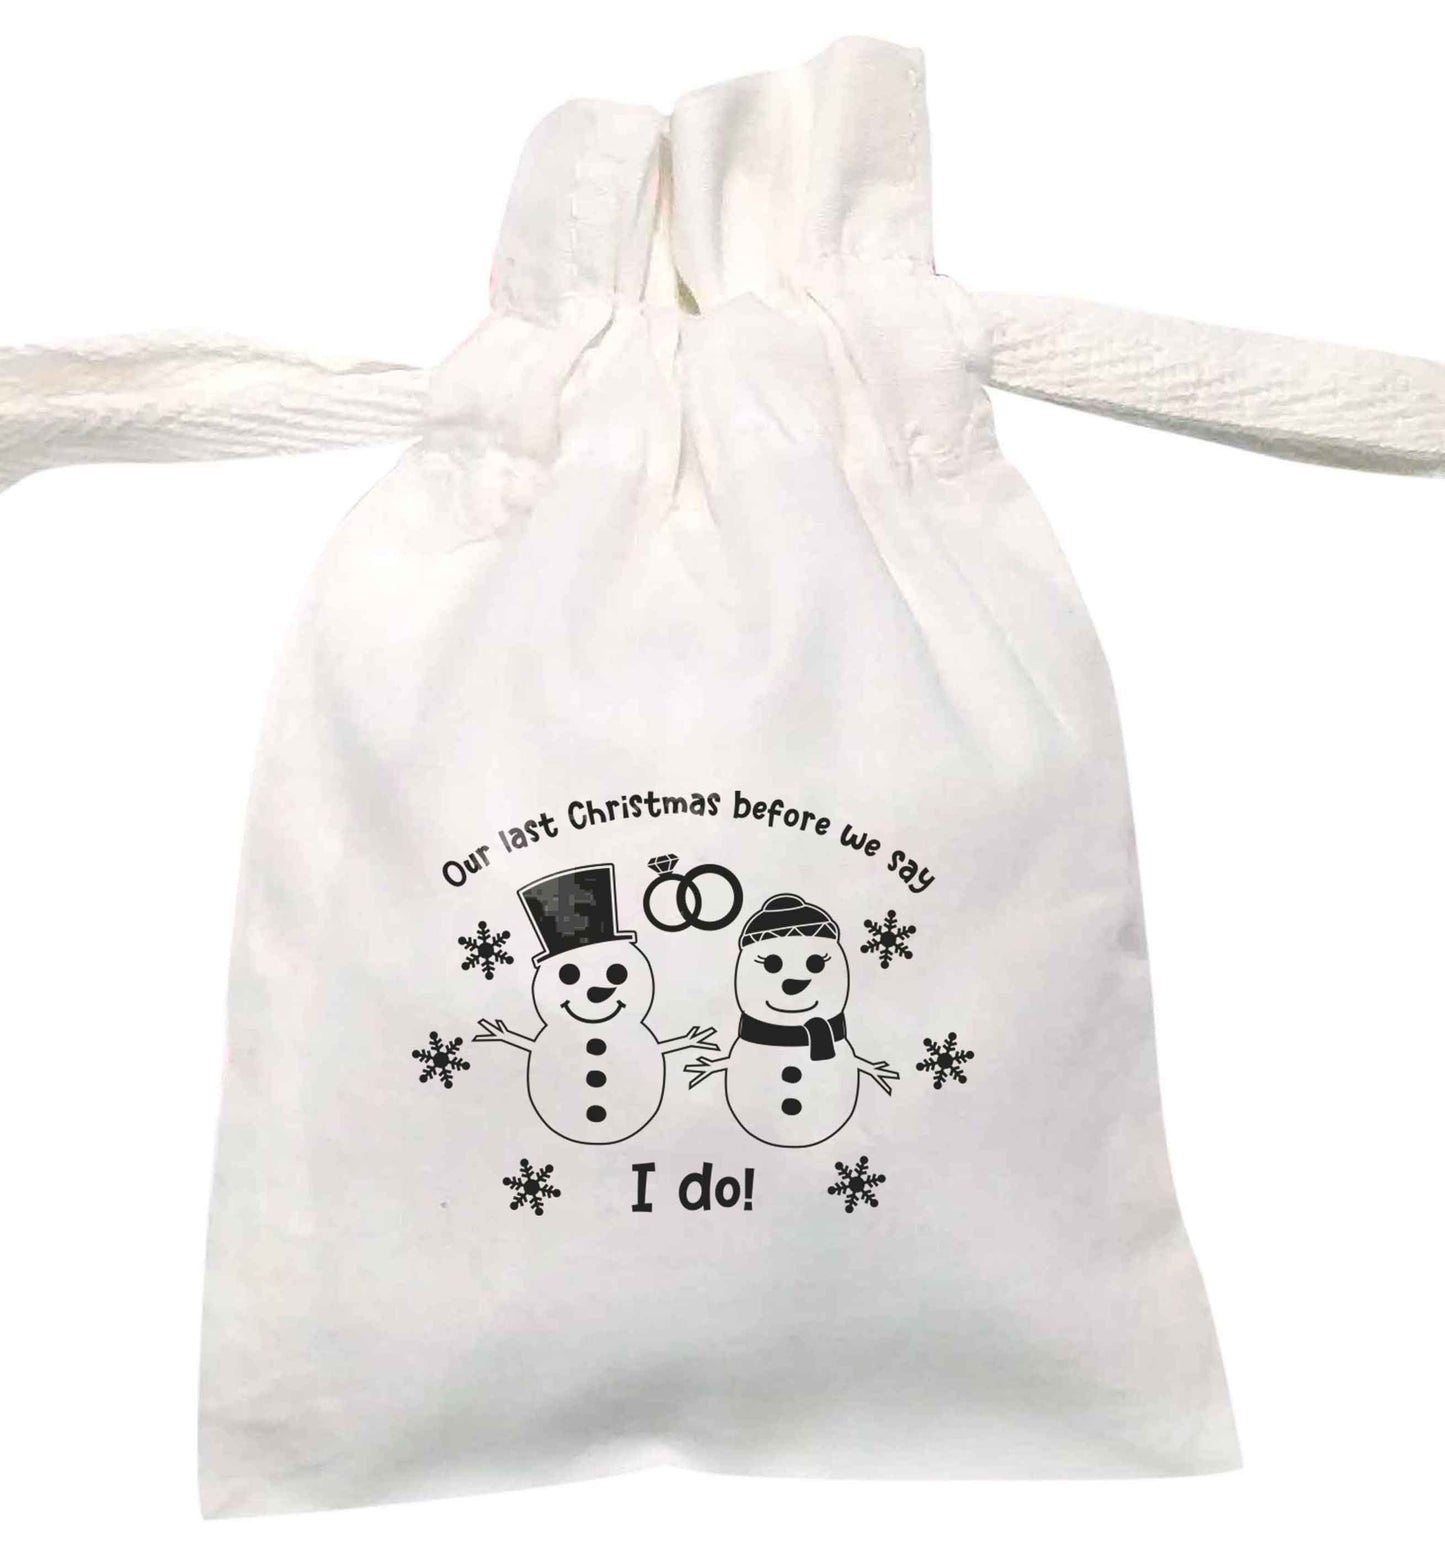 Last Christmas before we say I do | XS - L | Pouch / Drawstring bag / Sack | Organic Cotton | Bulk discounts available!